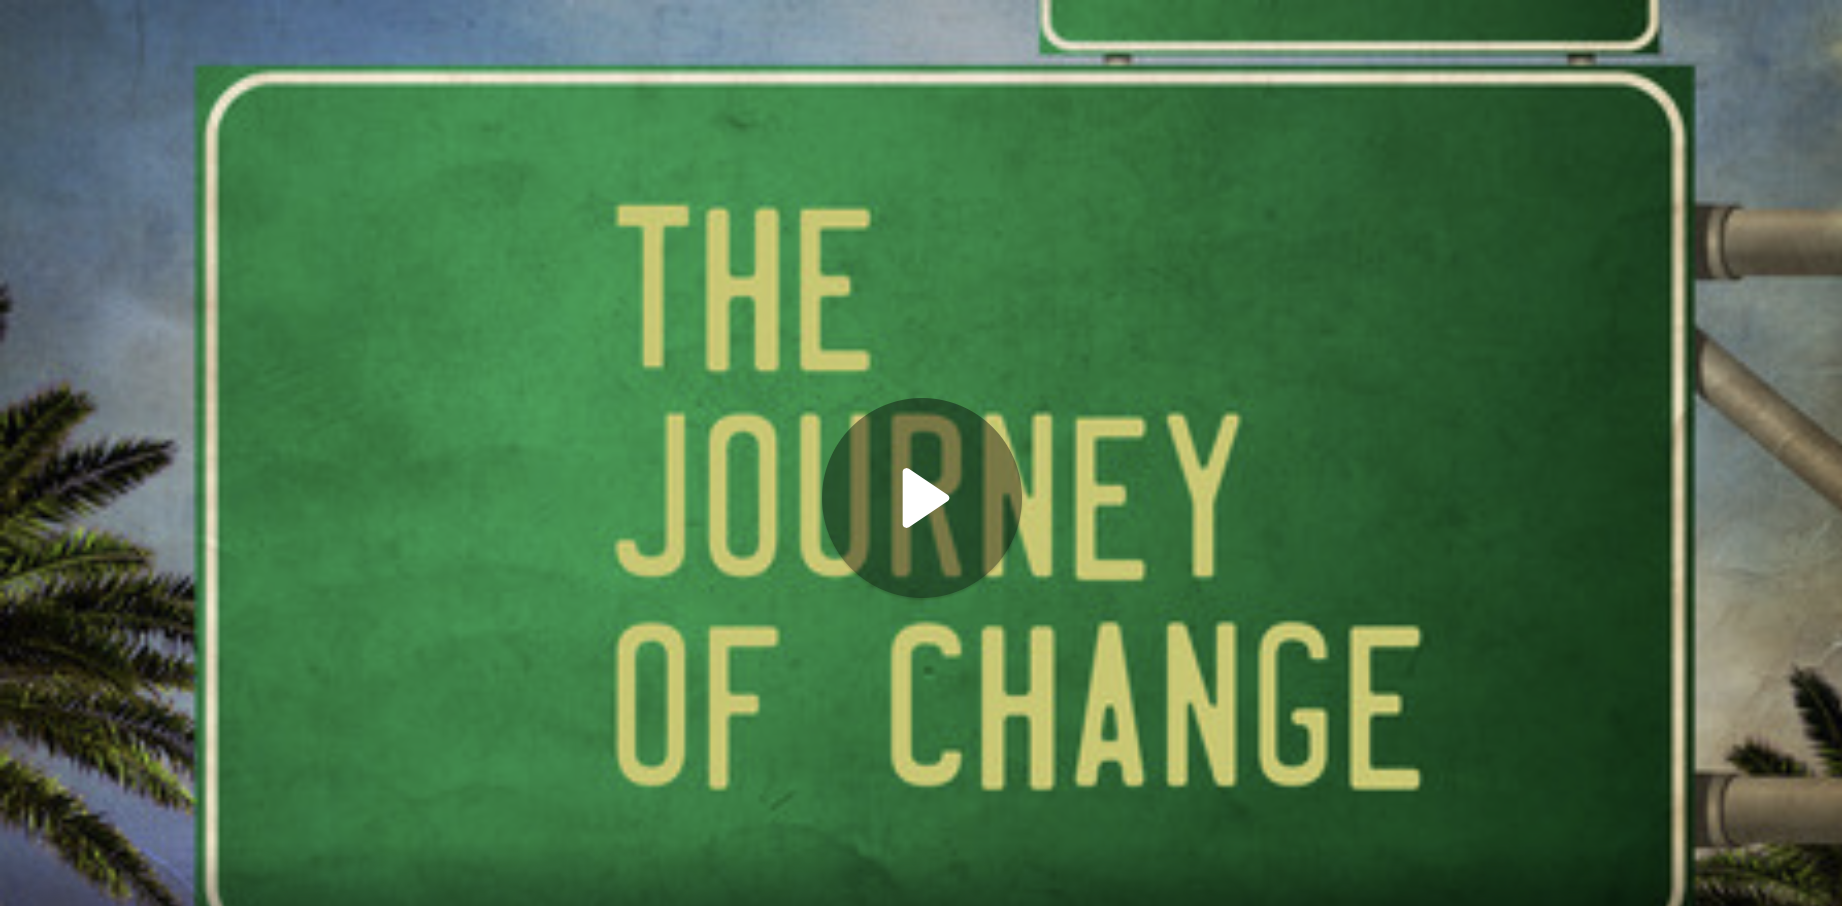 The Journey of Change